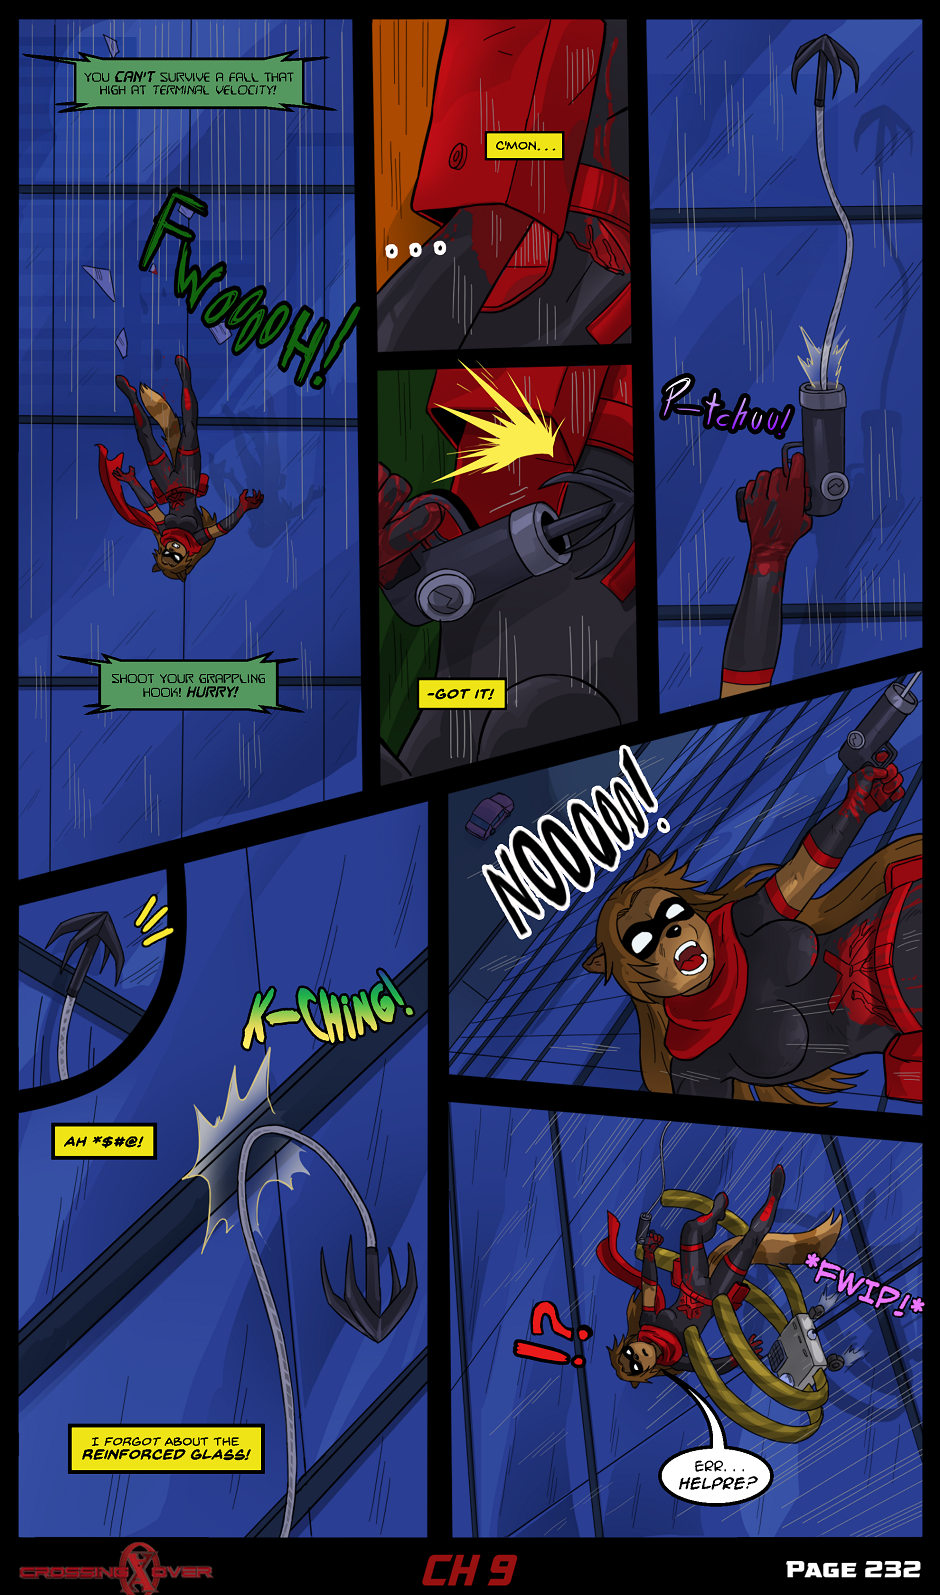 Page 232 (Ch 9)